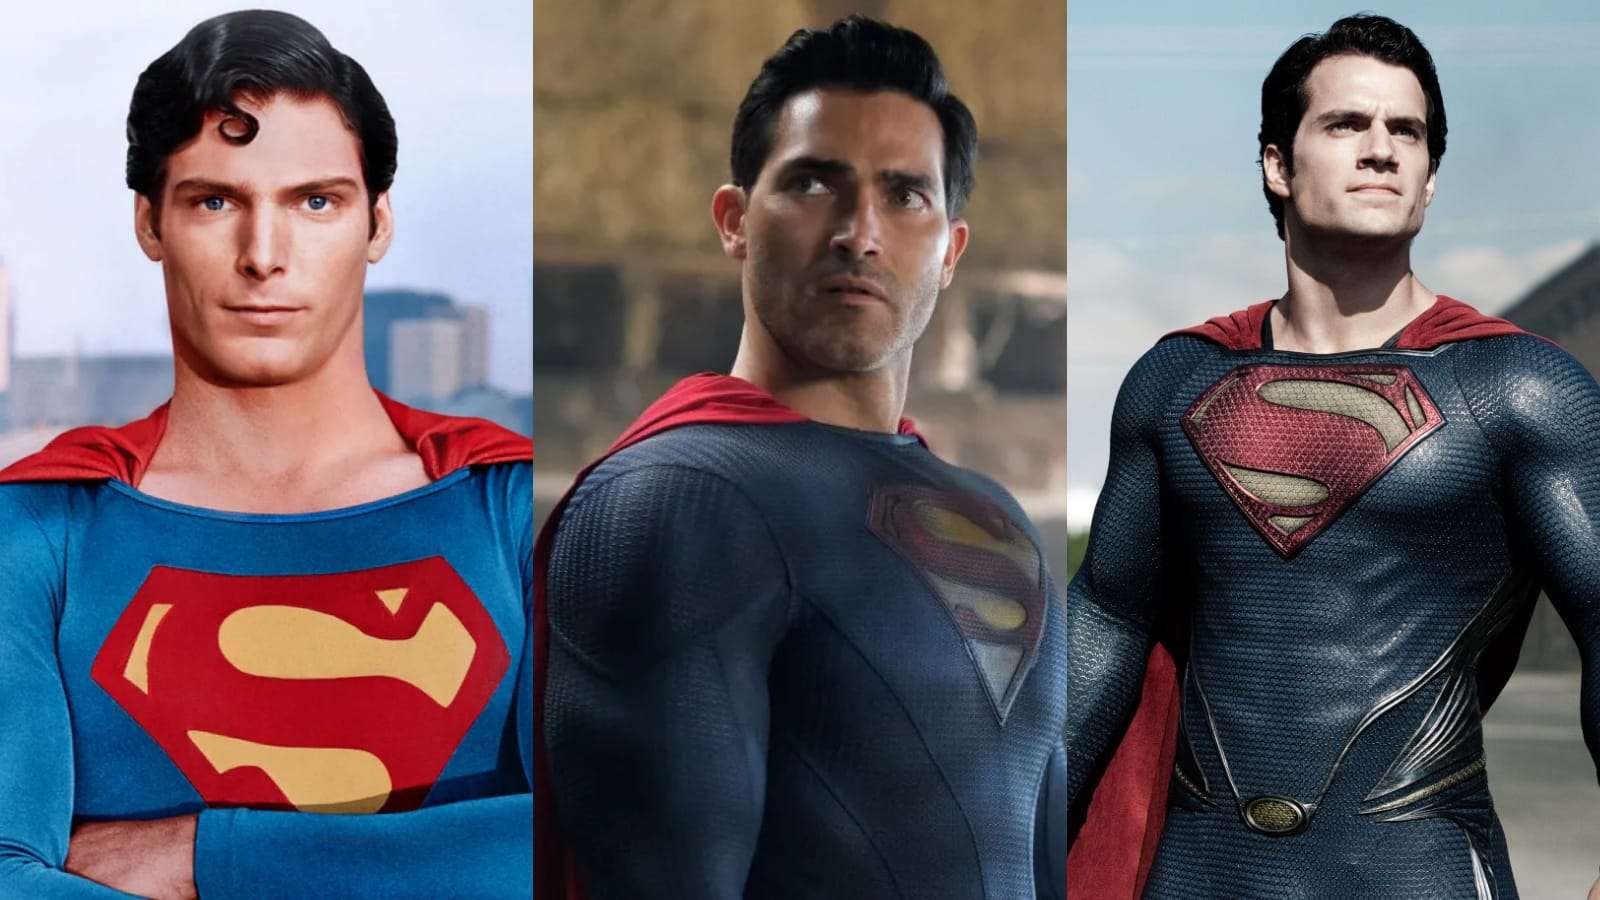 Superman actors Christopher Reeve, Tyler Hoechlin and Henry Cavill